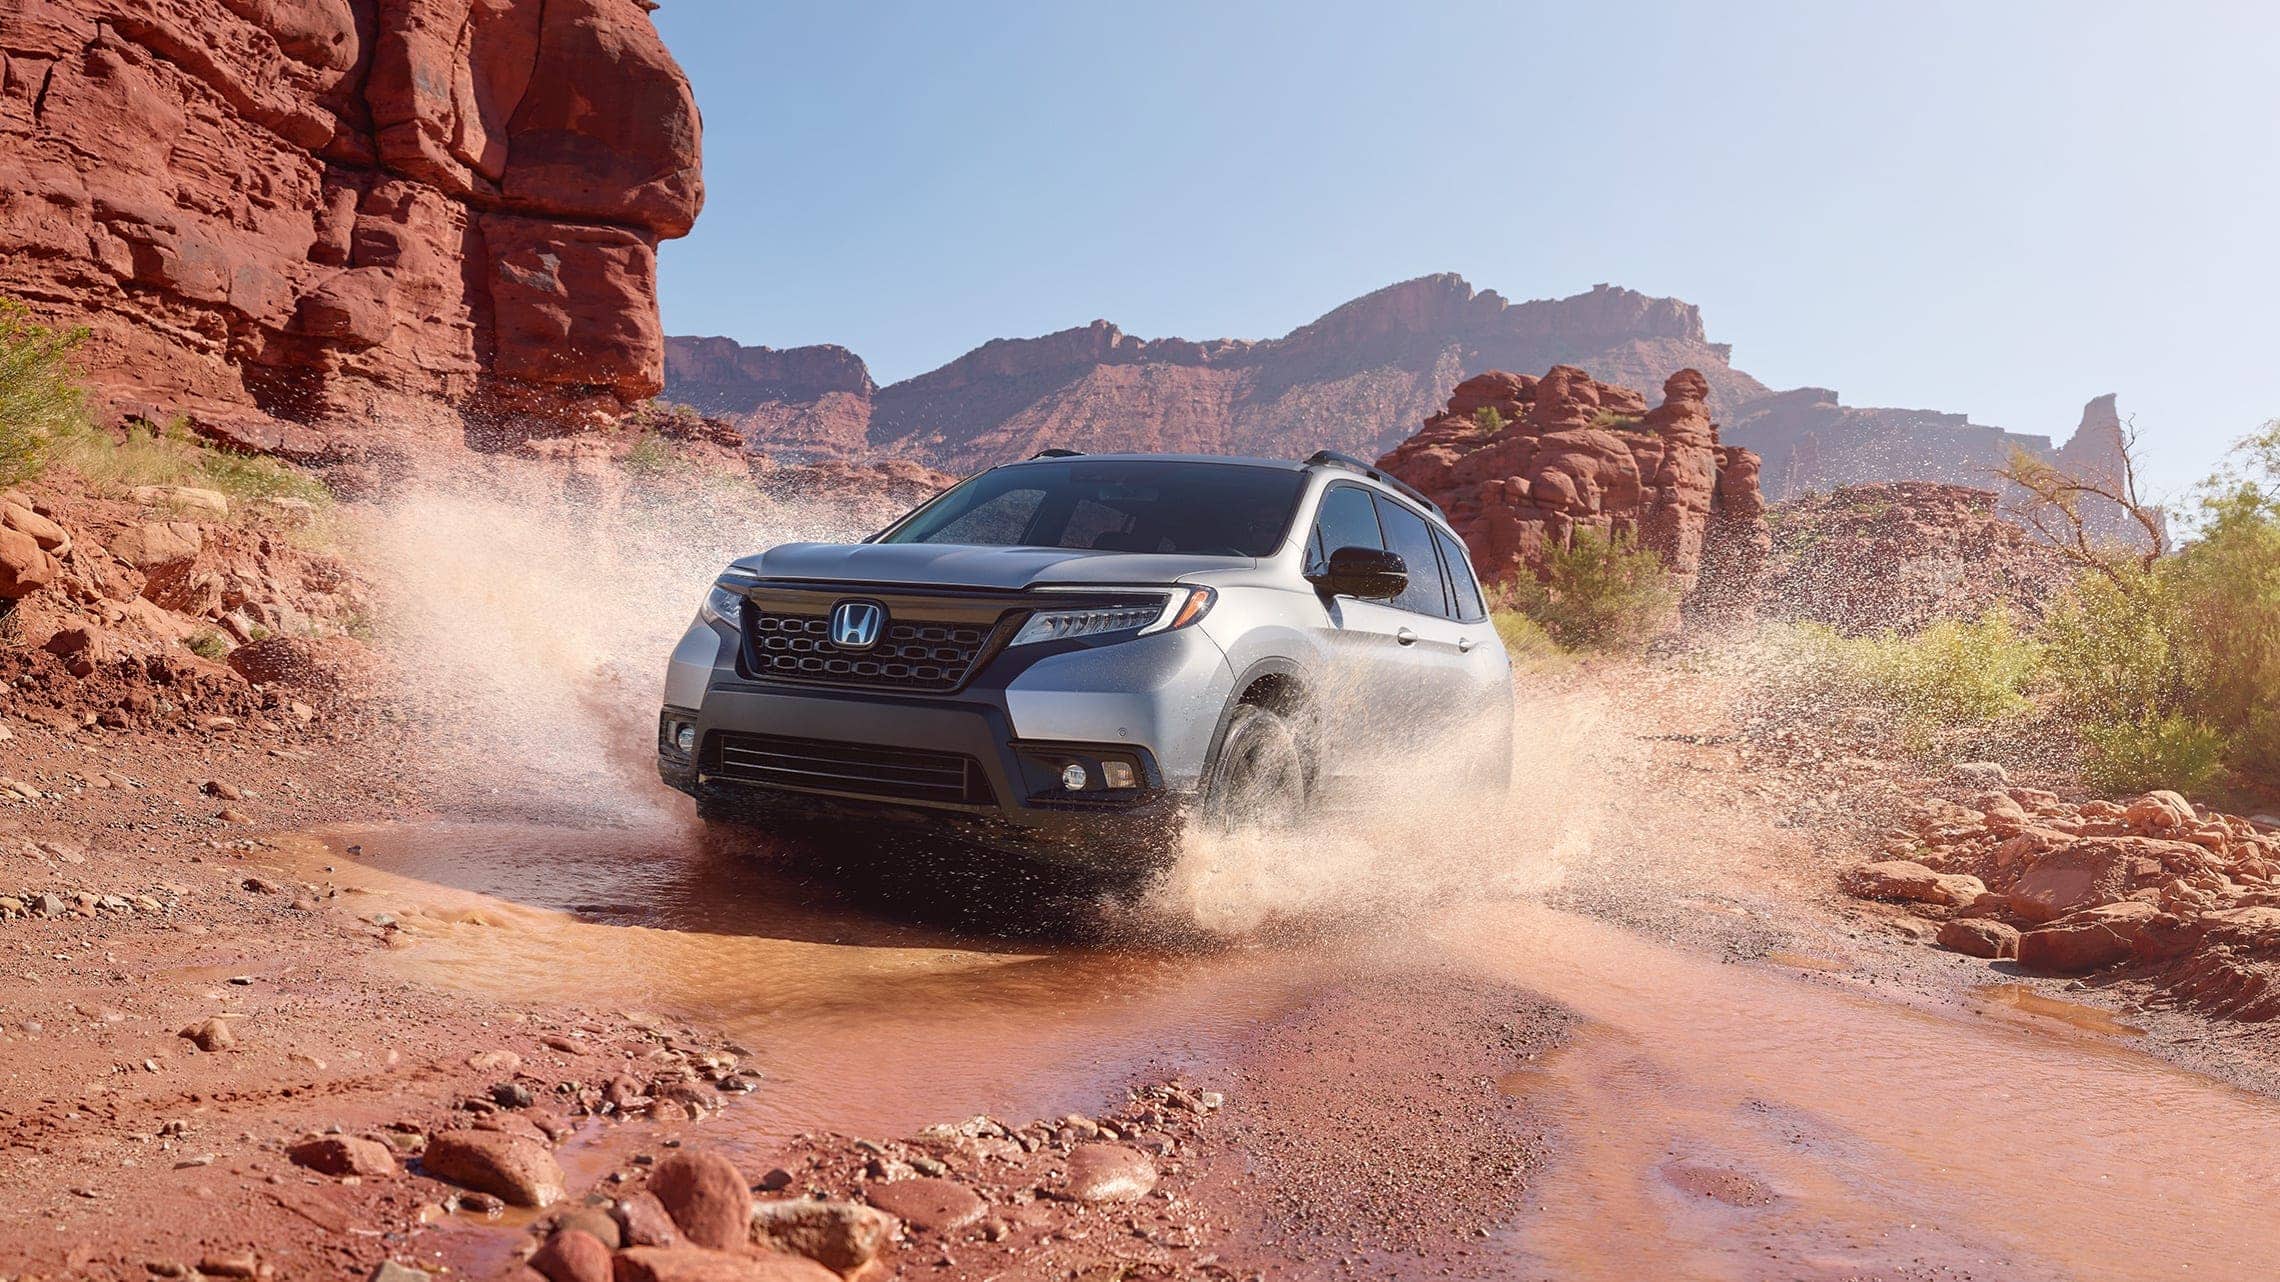 Driver-side front 3/4 view of 2019 Honda Passport Elite in Lunar Silver Metallic, demonstrating all-wheel drive and splashing through water on a rugged mountain road.